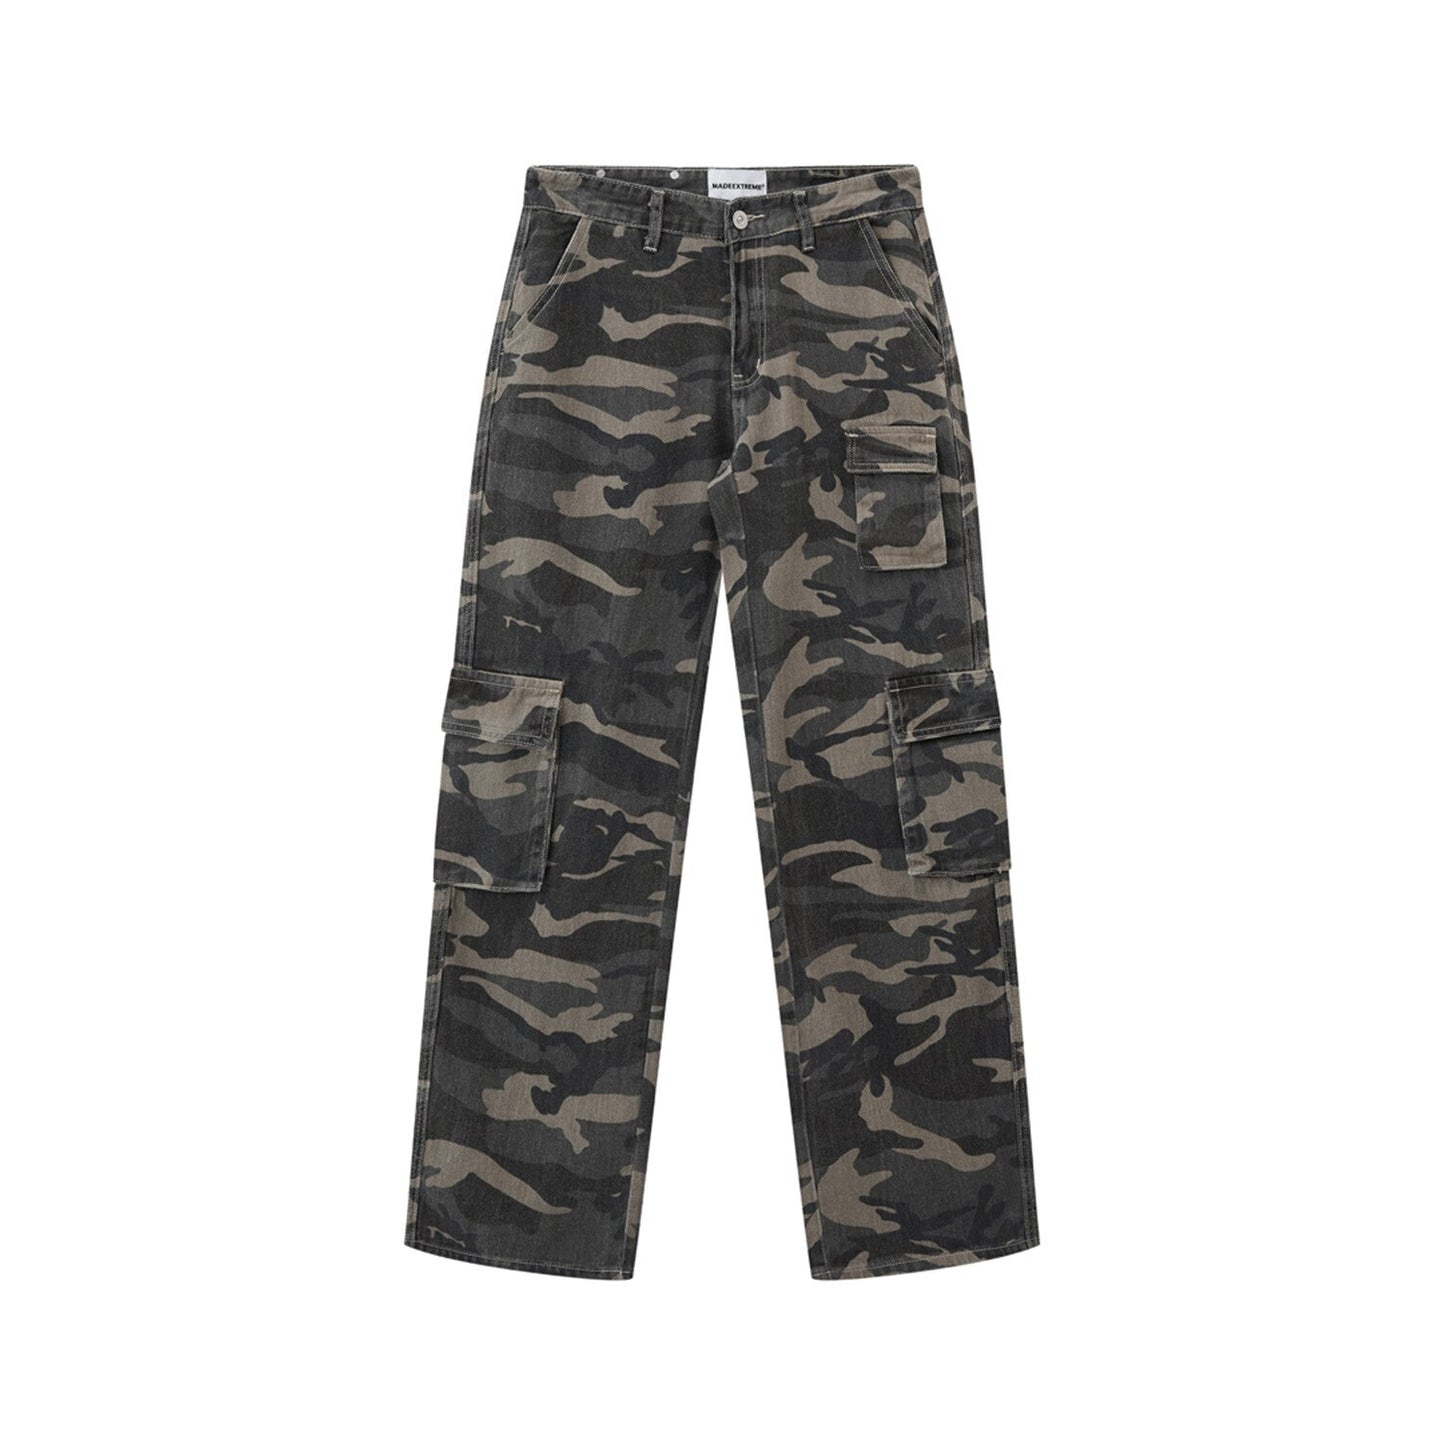 MADEEXTREME Loose fitting camouflage casual cargo pants